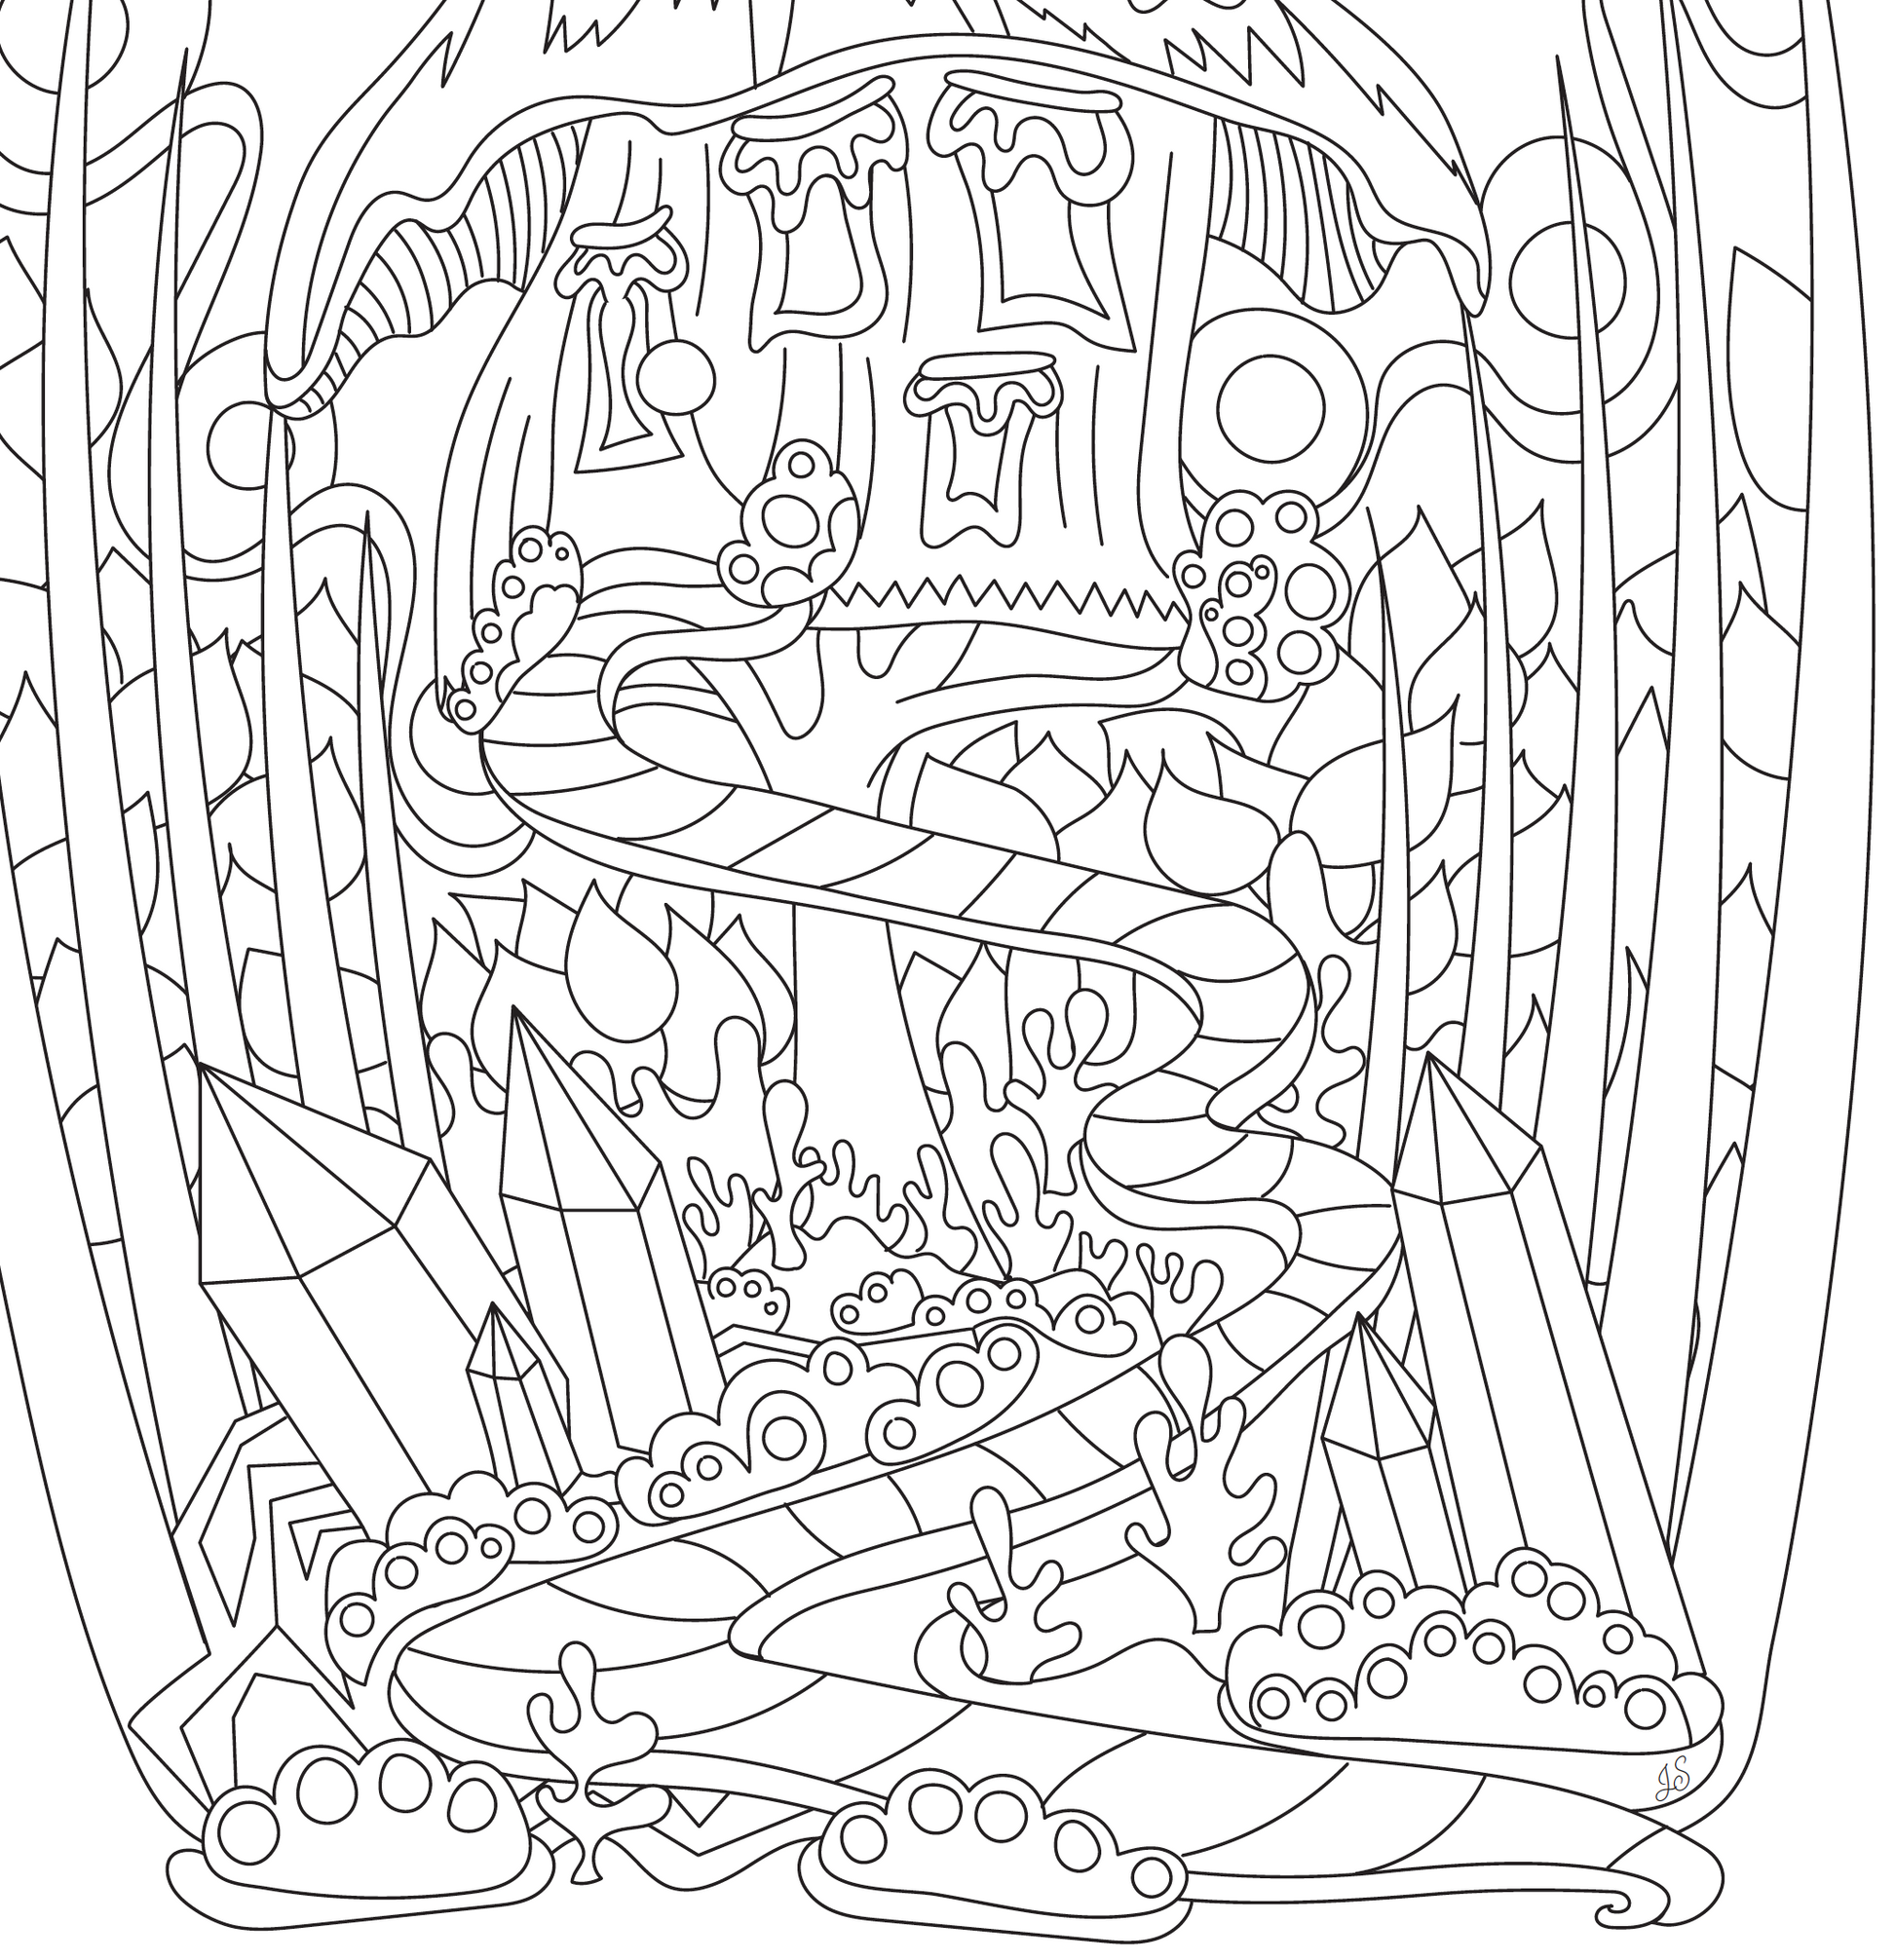 digital design for coloring book for downloading which shows crstals growing from a path in an imaginary forest scene for coloring